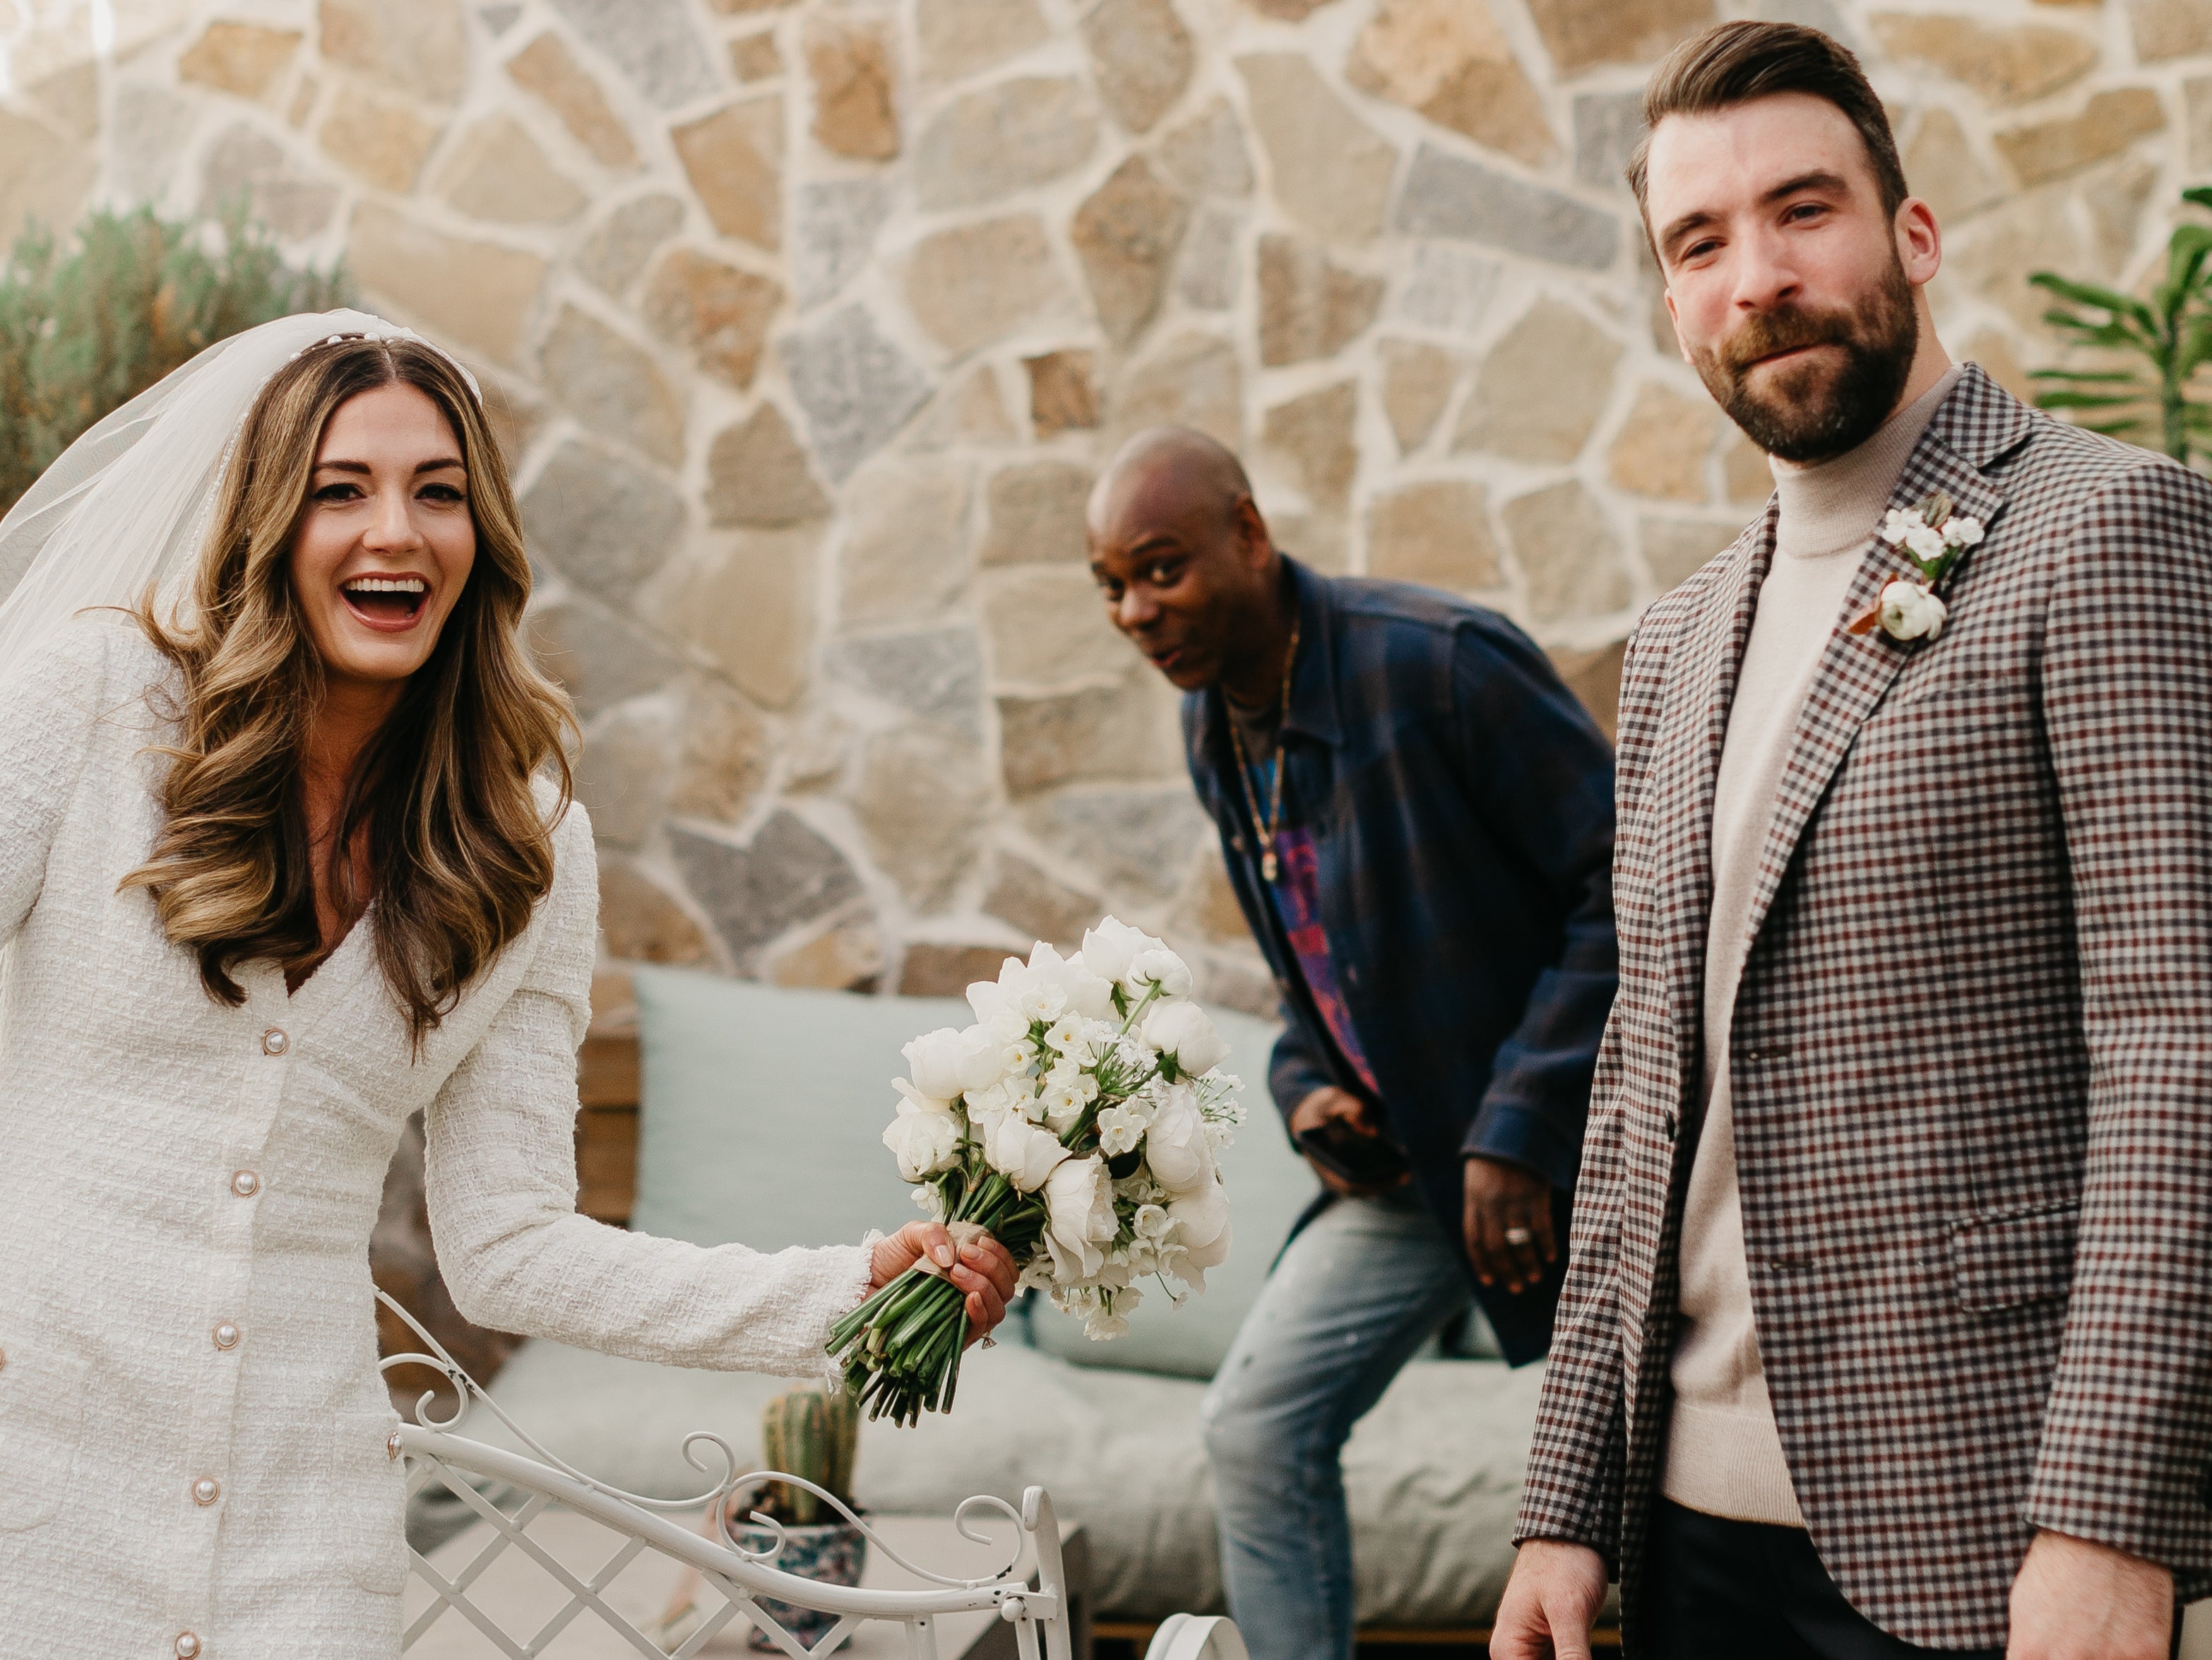 Dave Chappelle photobombs a Texas couple’s ‘first look’ wedding photos